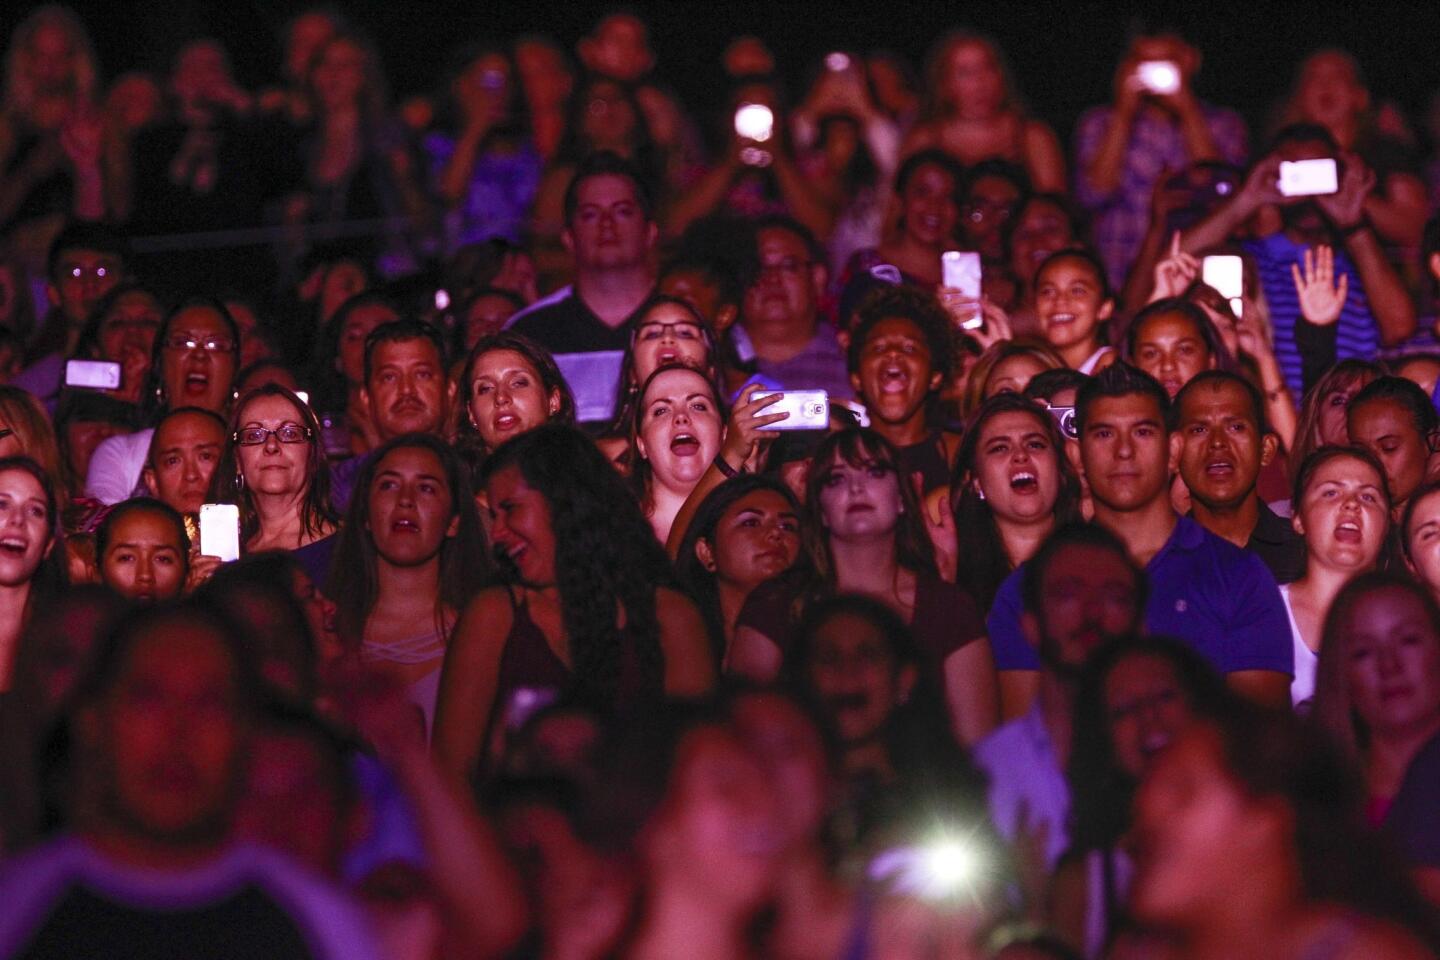 Fans sing along as Demi Lovato performs.